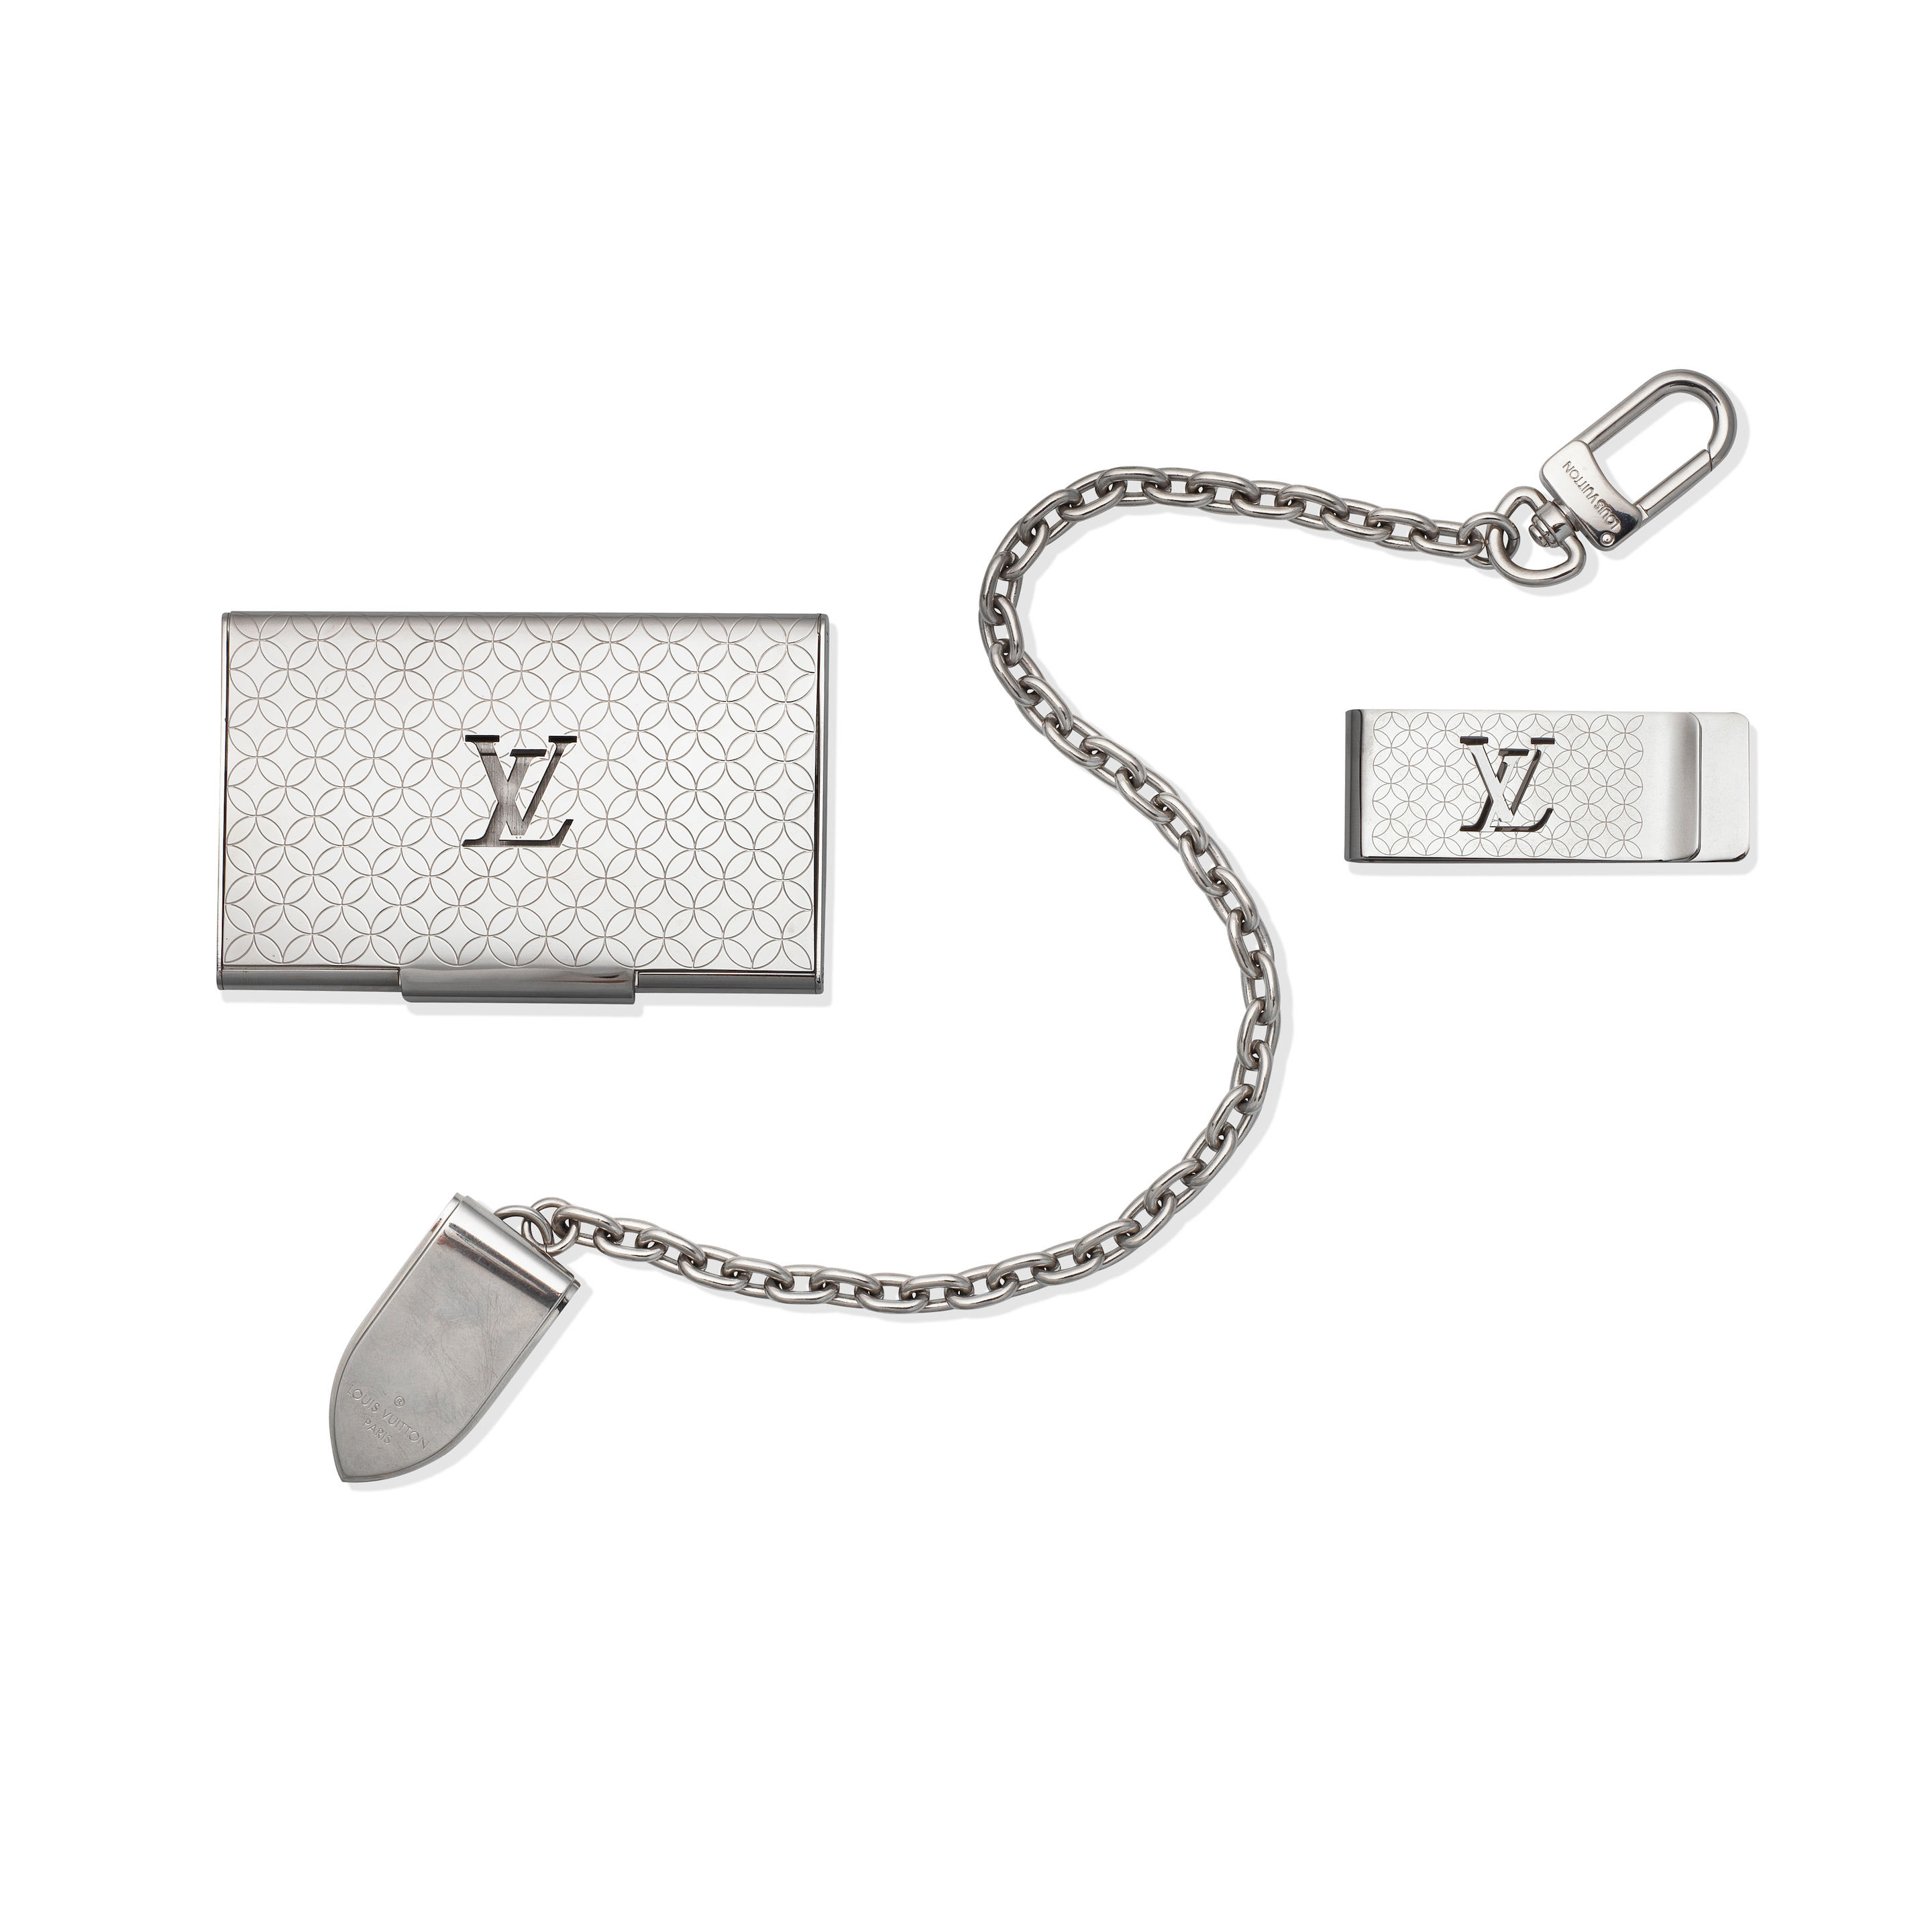 Bonhams : Two Bill Clips and one Card Holder, Louis Vuitton, c